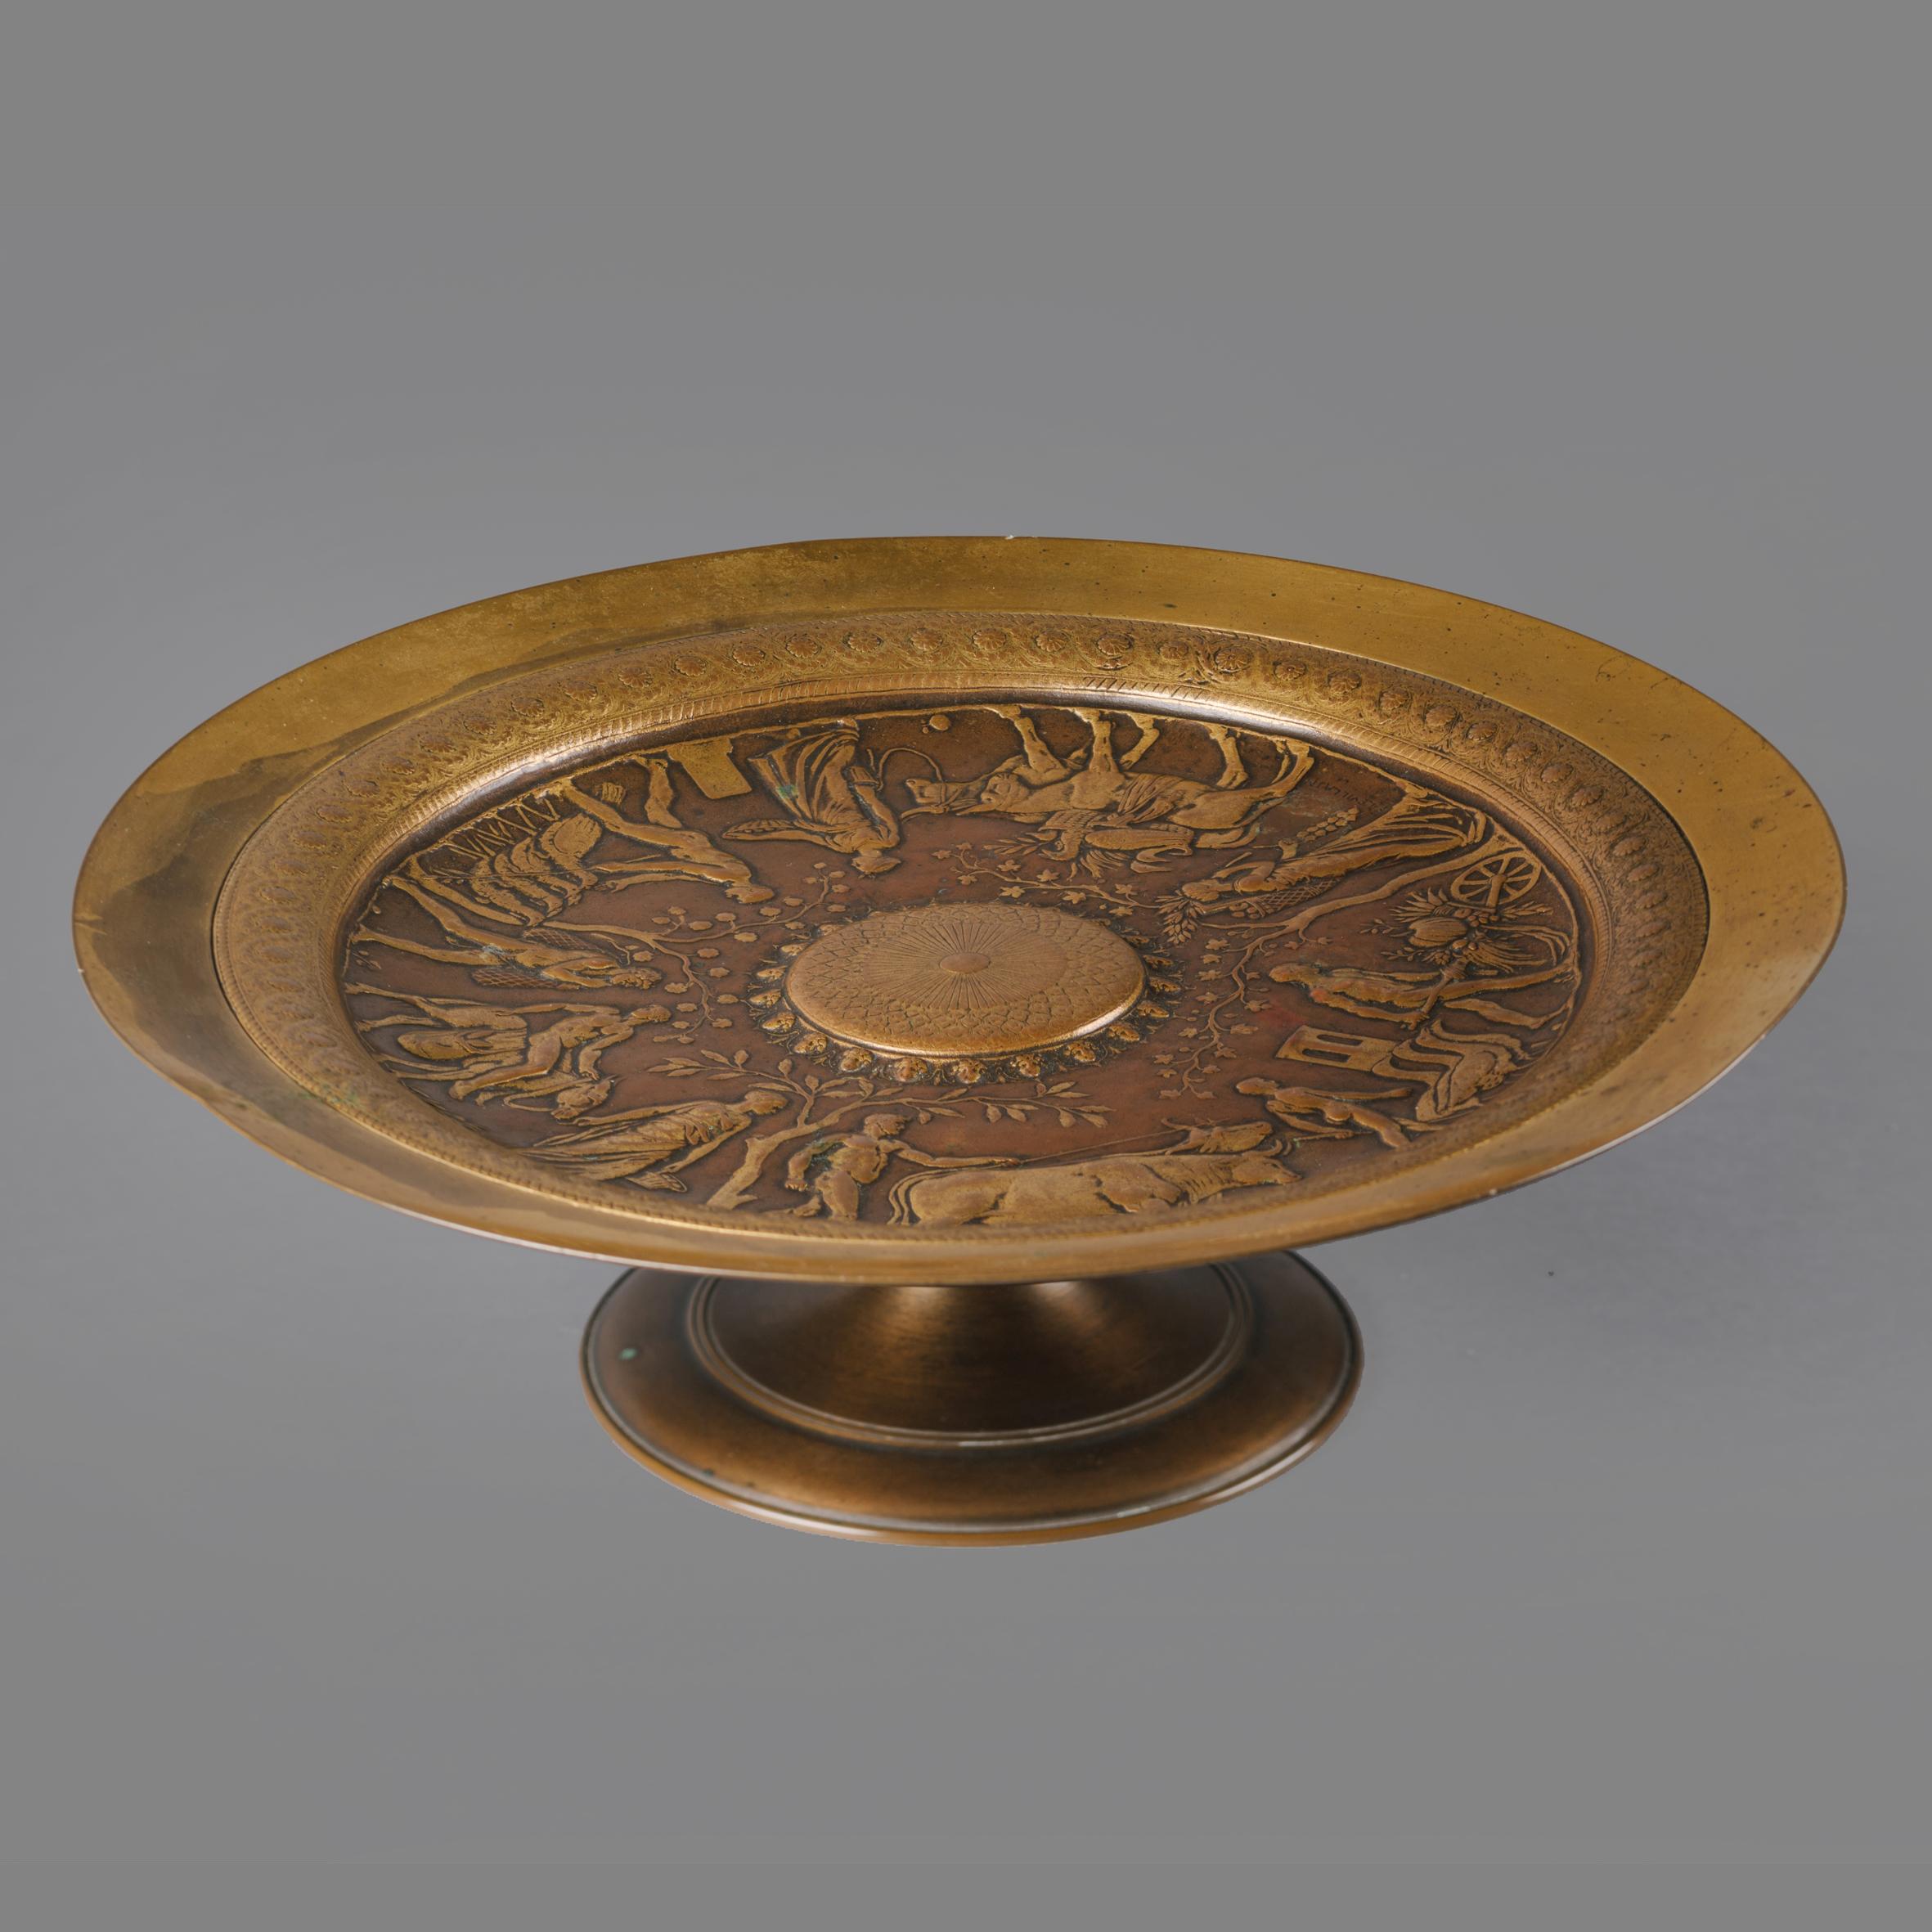 Neoclassical Revival Neo-Grec Gilt and Patinated Bronze Tazza, Cast by Barbedienne For Sale